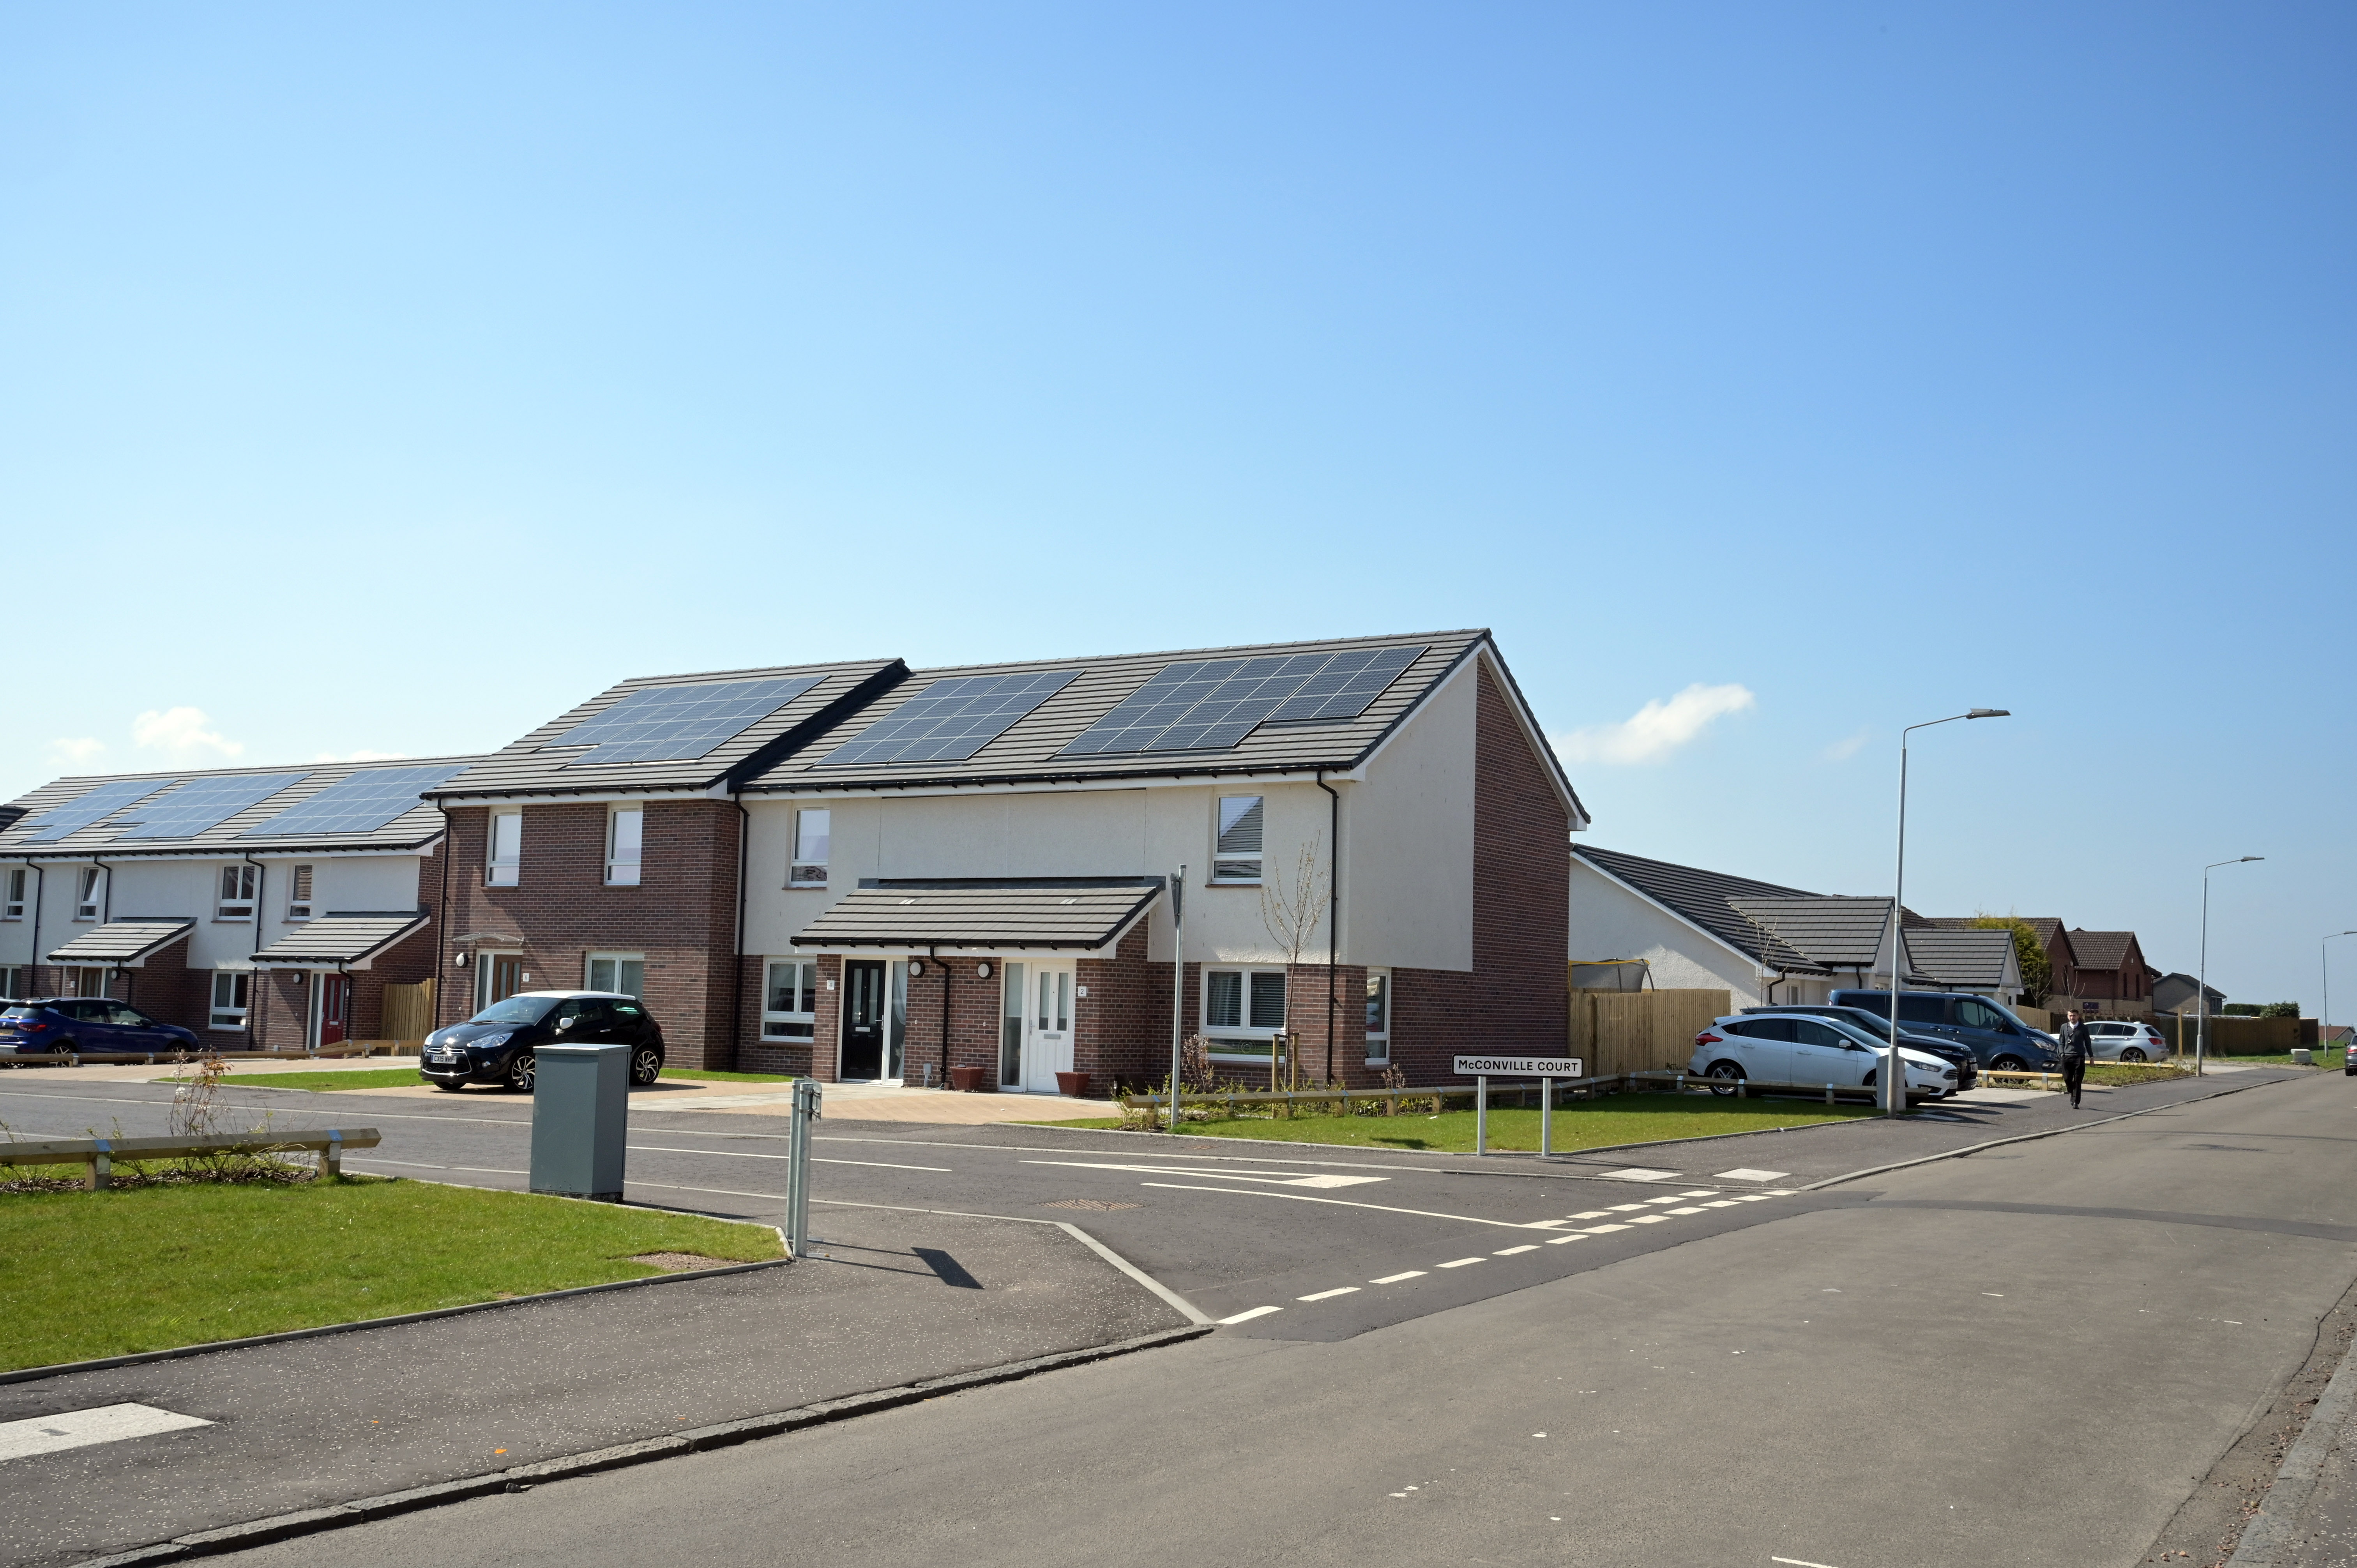 New council homes completed in Bellshill